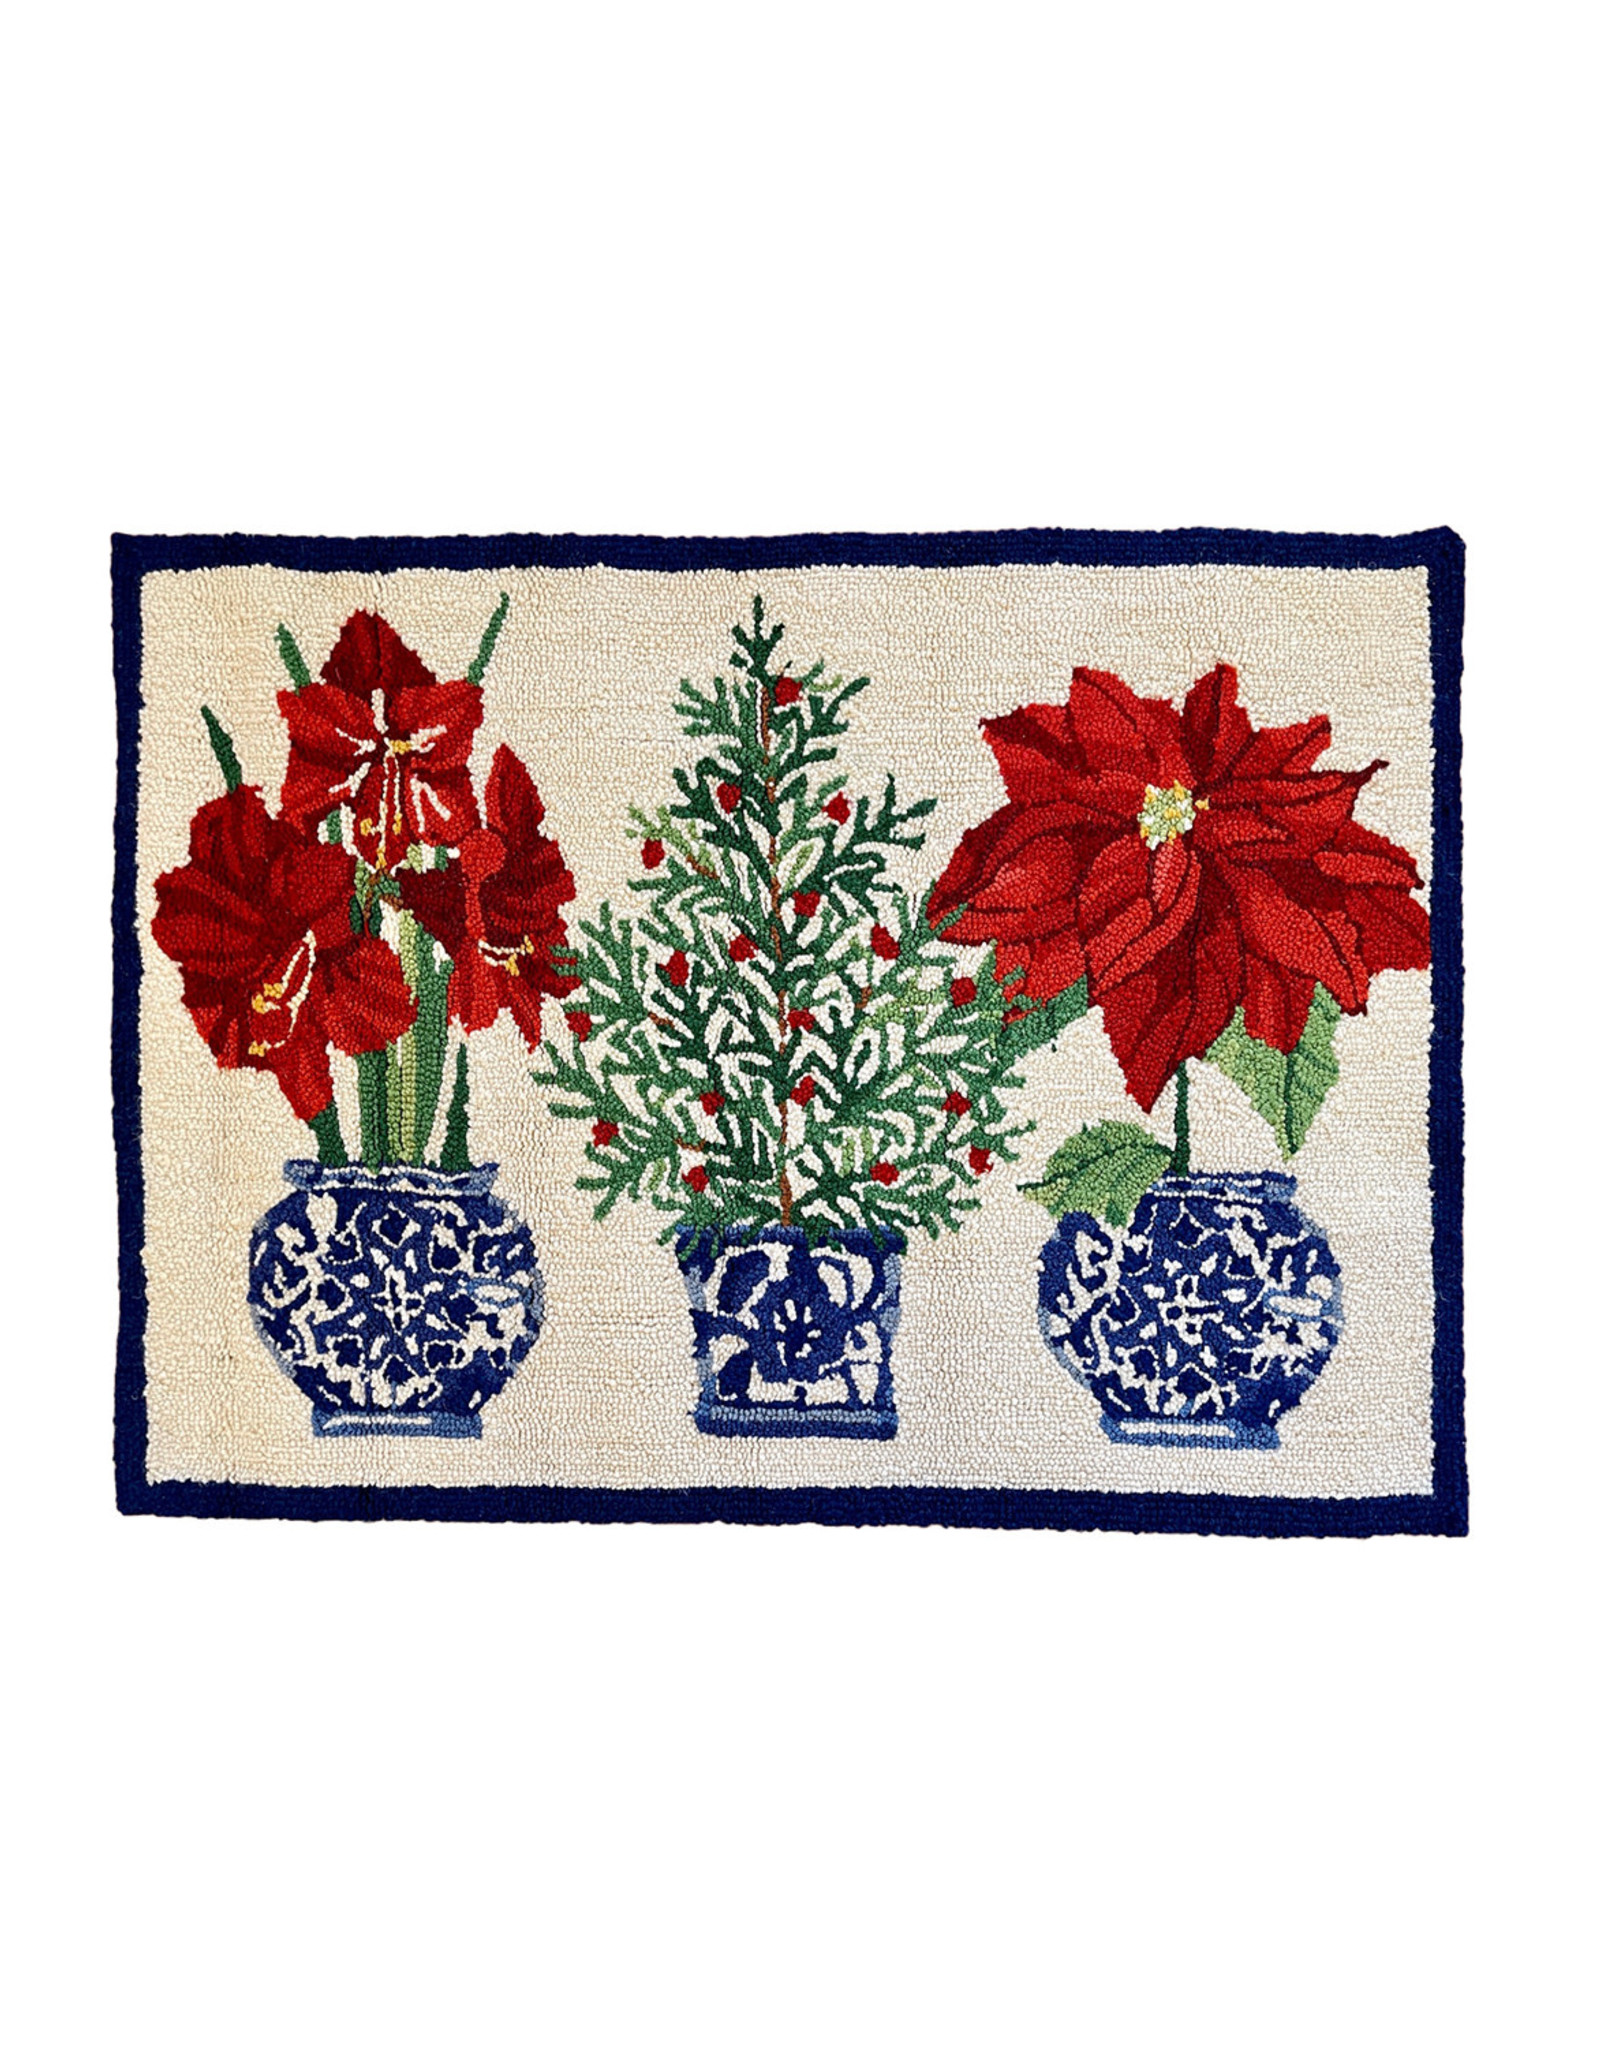 Holiday Chinoiserie Hook Rug - 2' X 3'